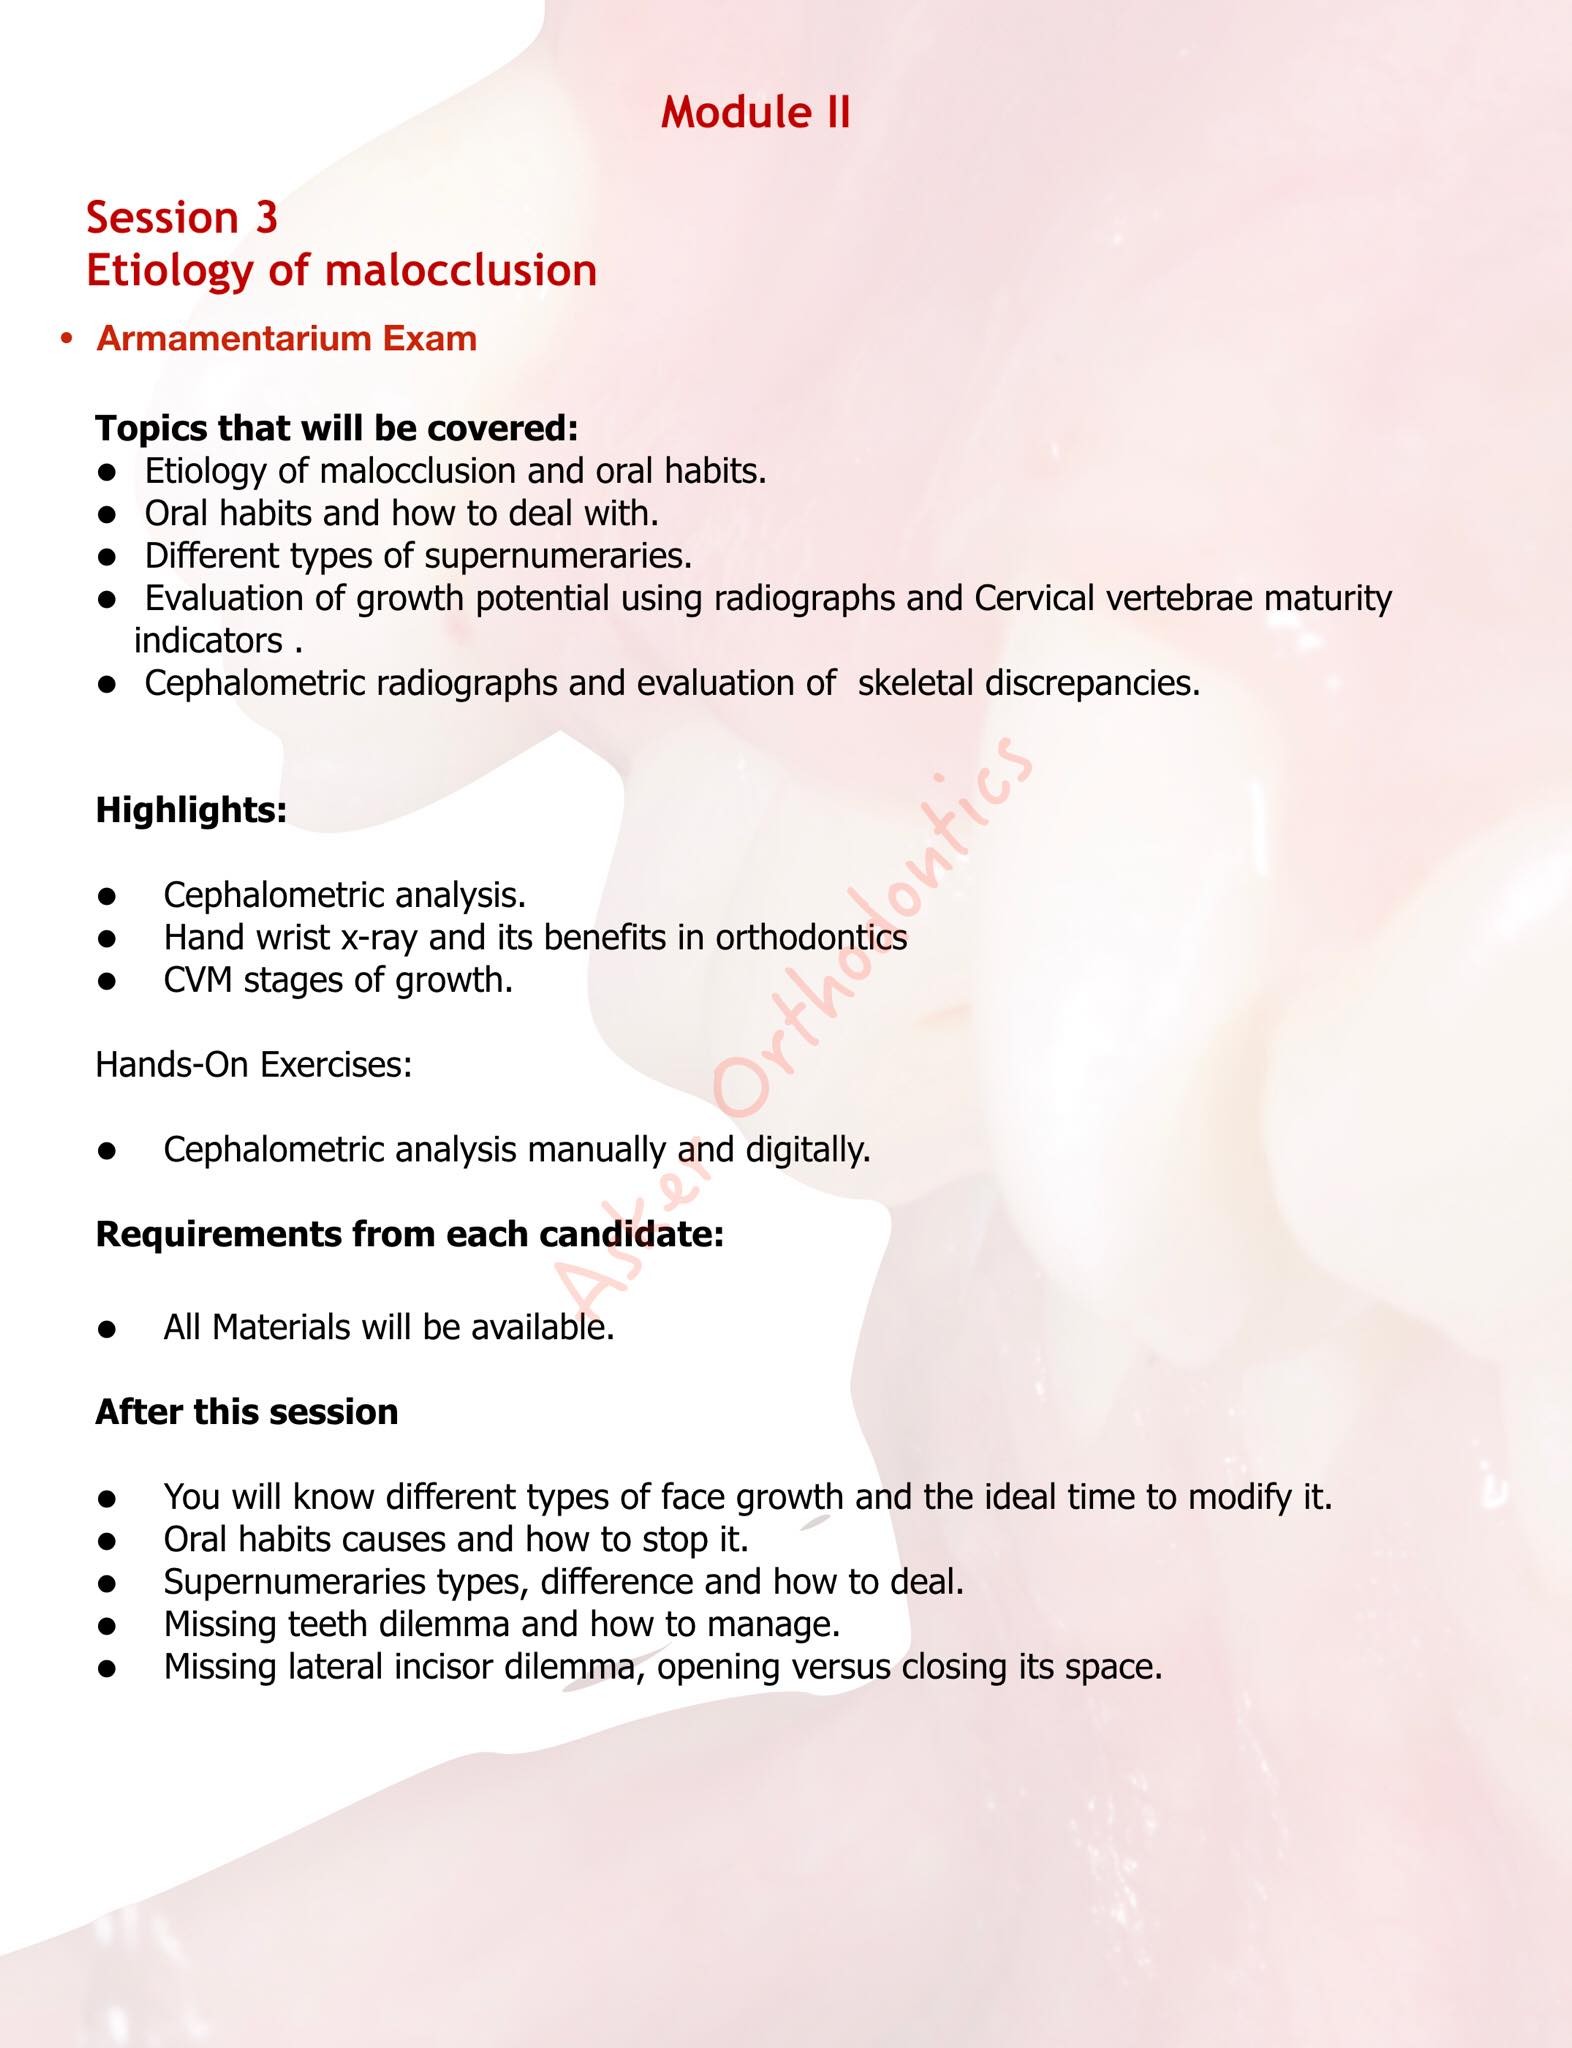 Session 3 ( Etiology of malocclusion) image